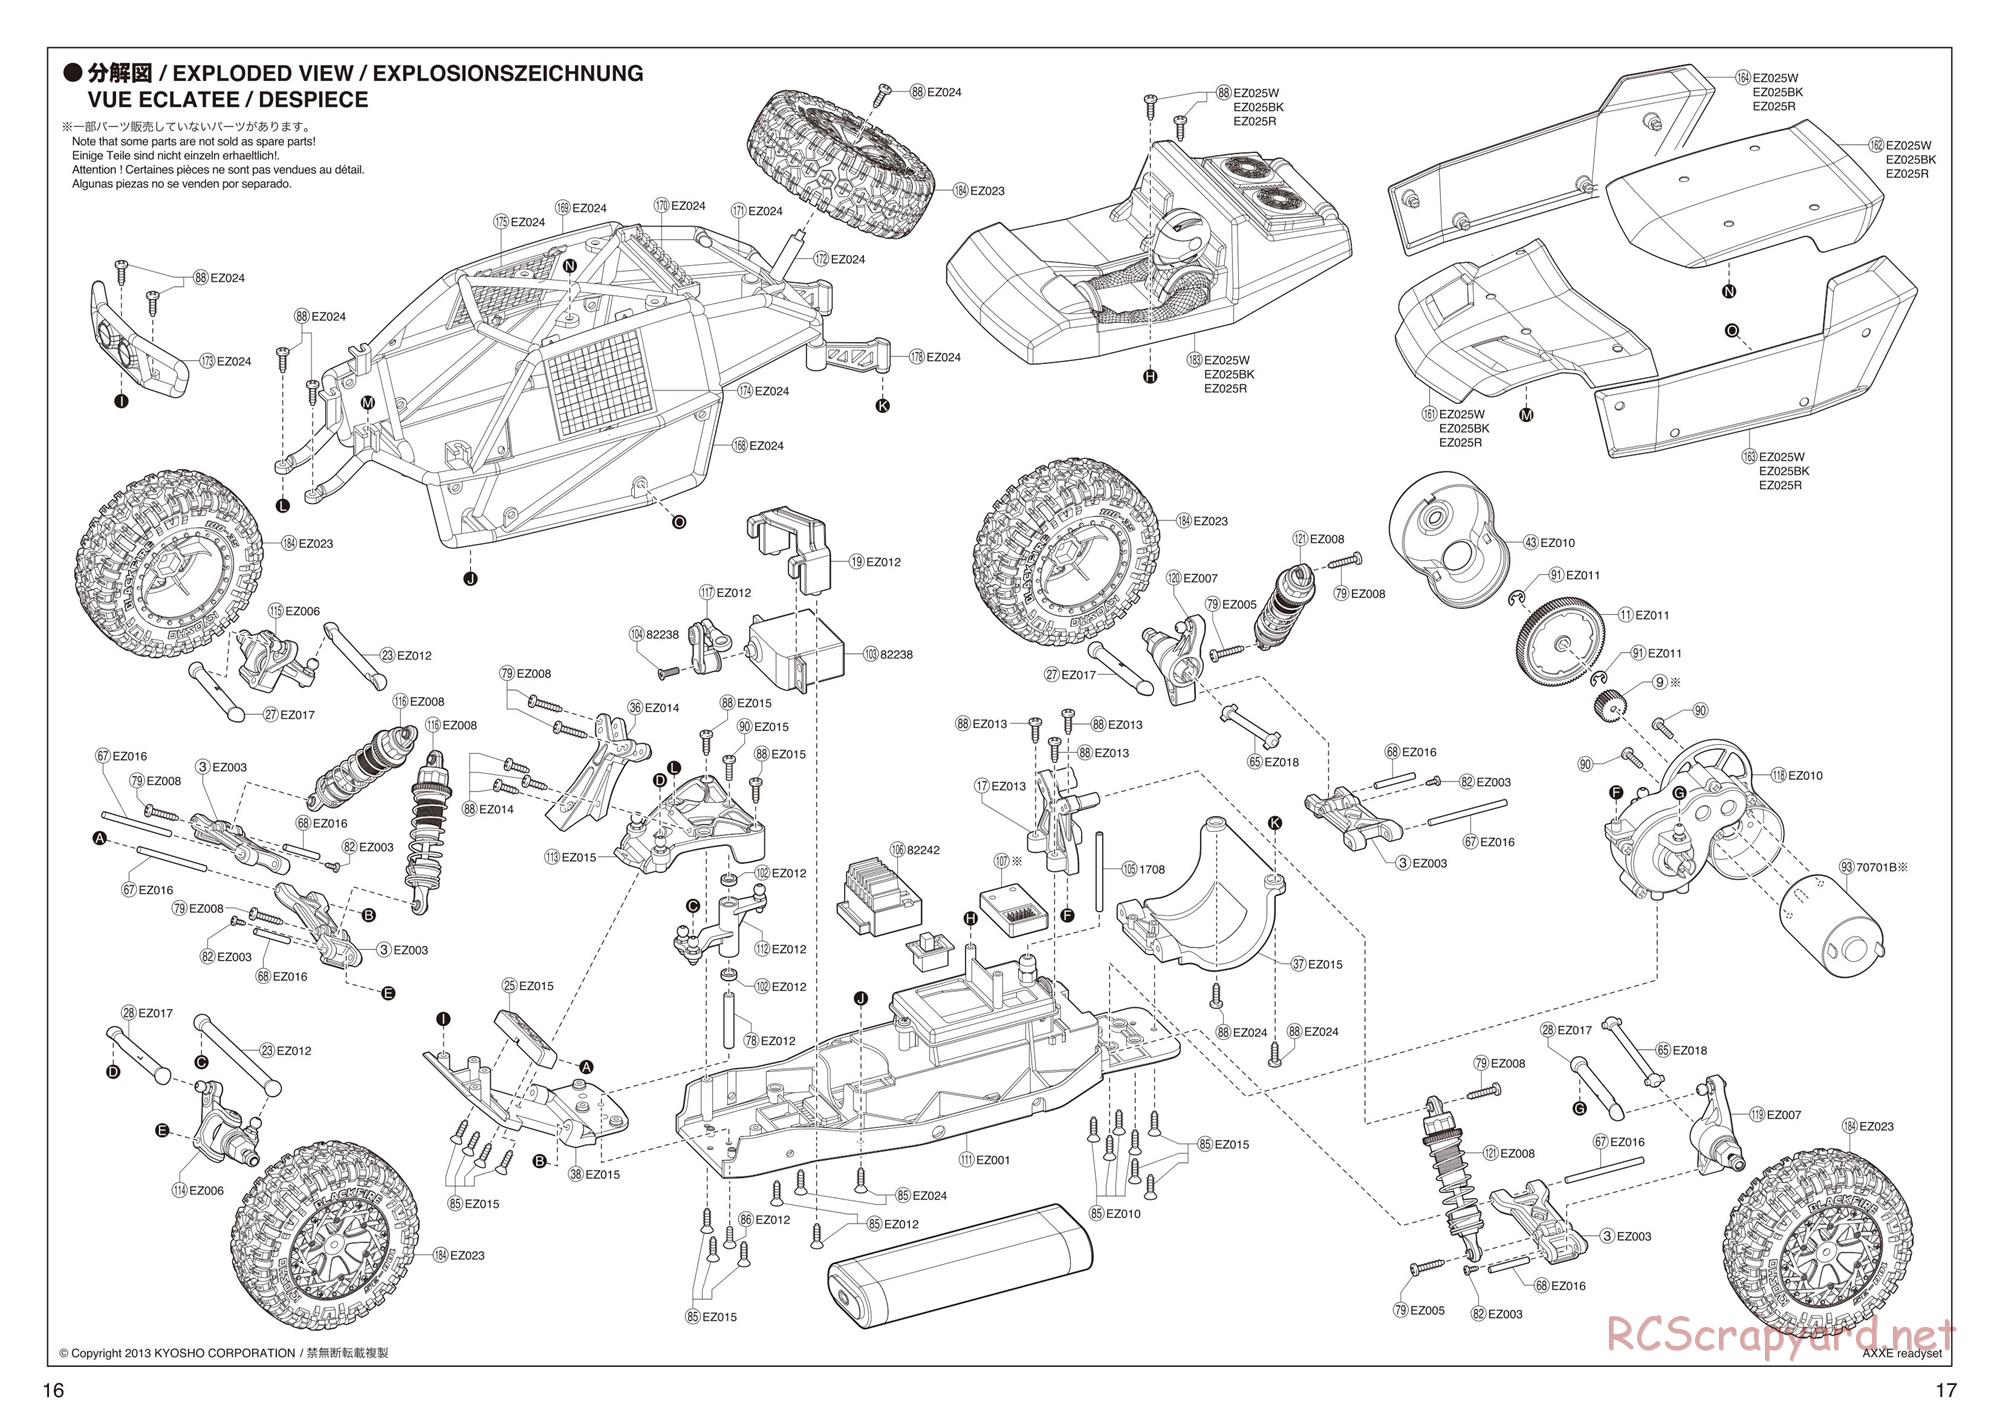 Kyosho - Axxe 2WD Desert Buggy - Exploded Views - Page 1